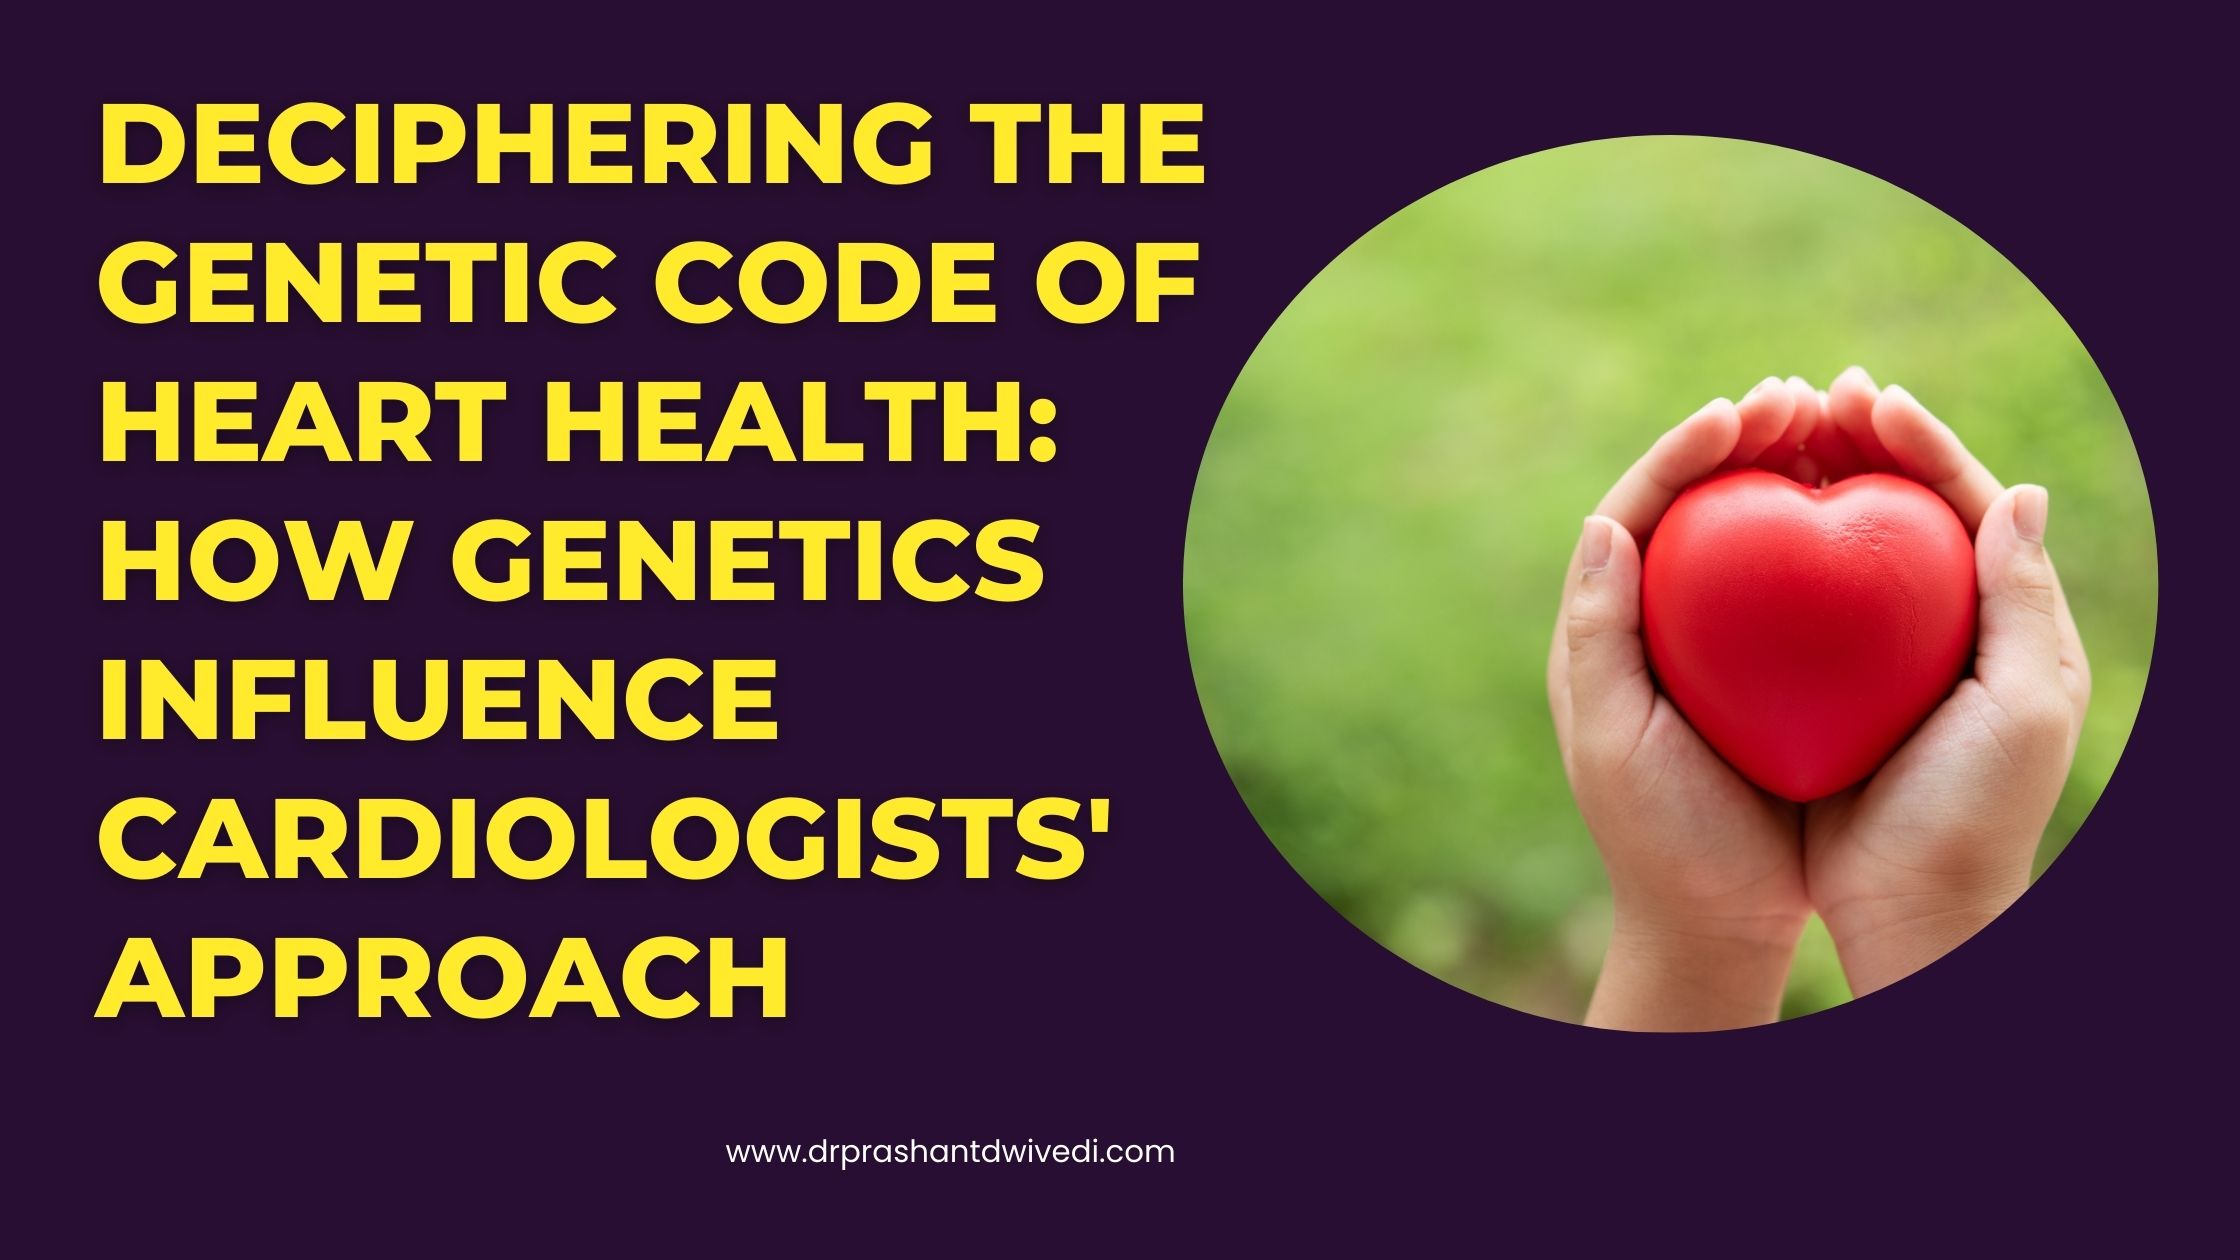 Deciphering the Genetic Code of Heart Health: How Genetics Influence Cardiologists' Approach